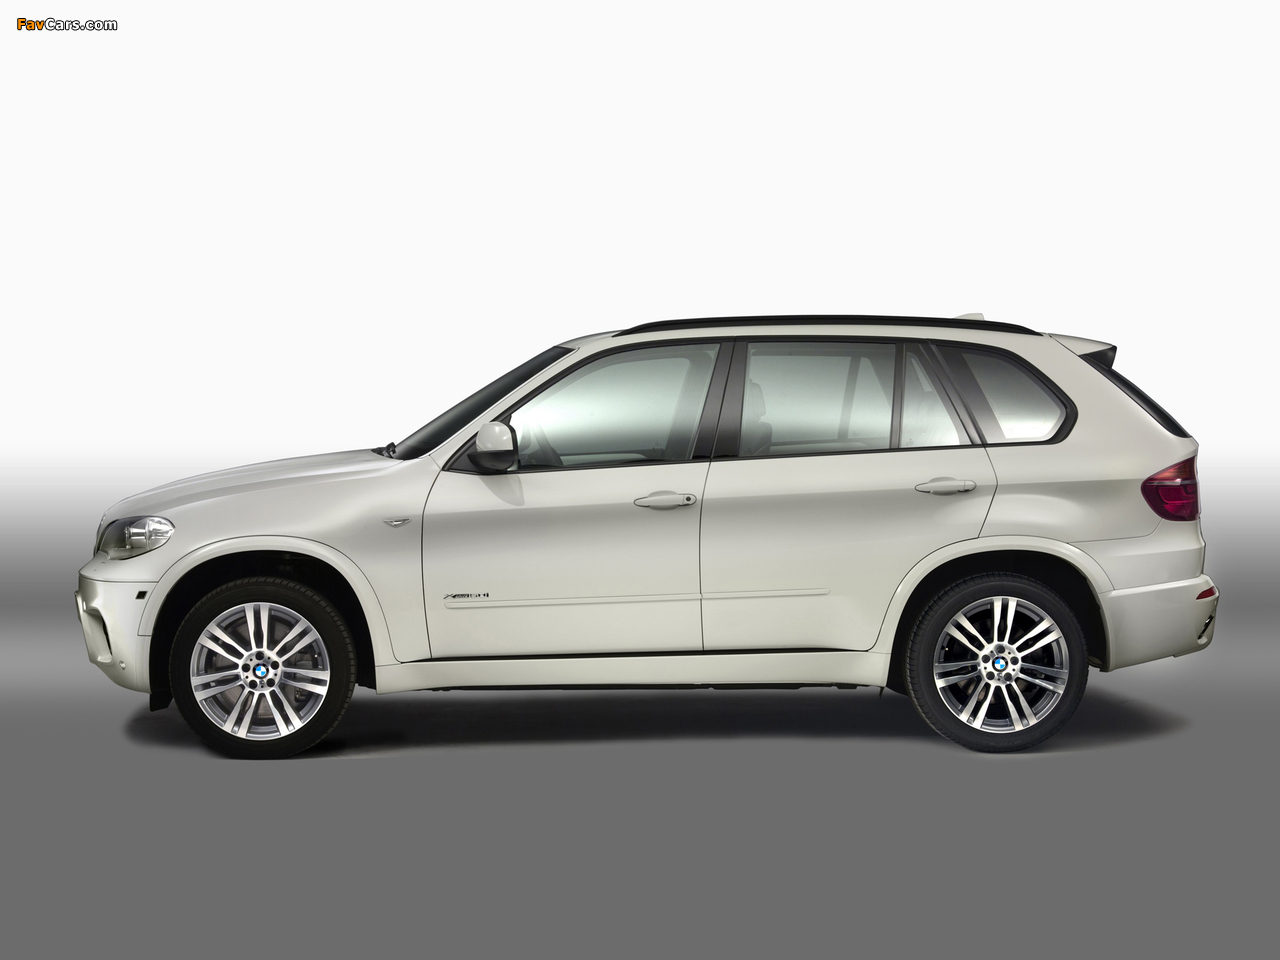 BMW X5 xDrive50i M Sports Package (E70) 2010 pictures (1280 x 960)